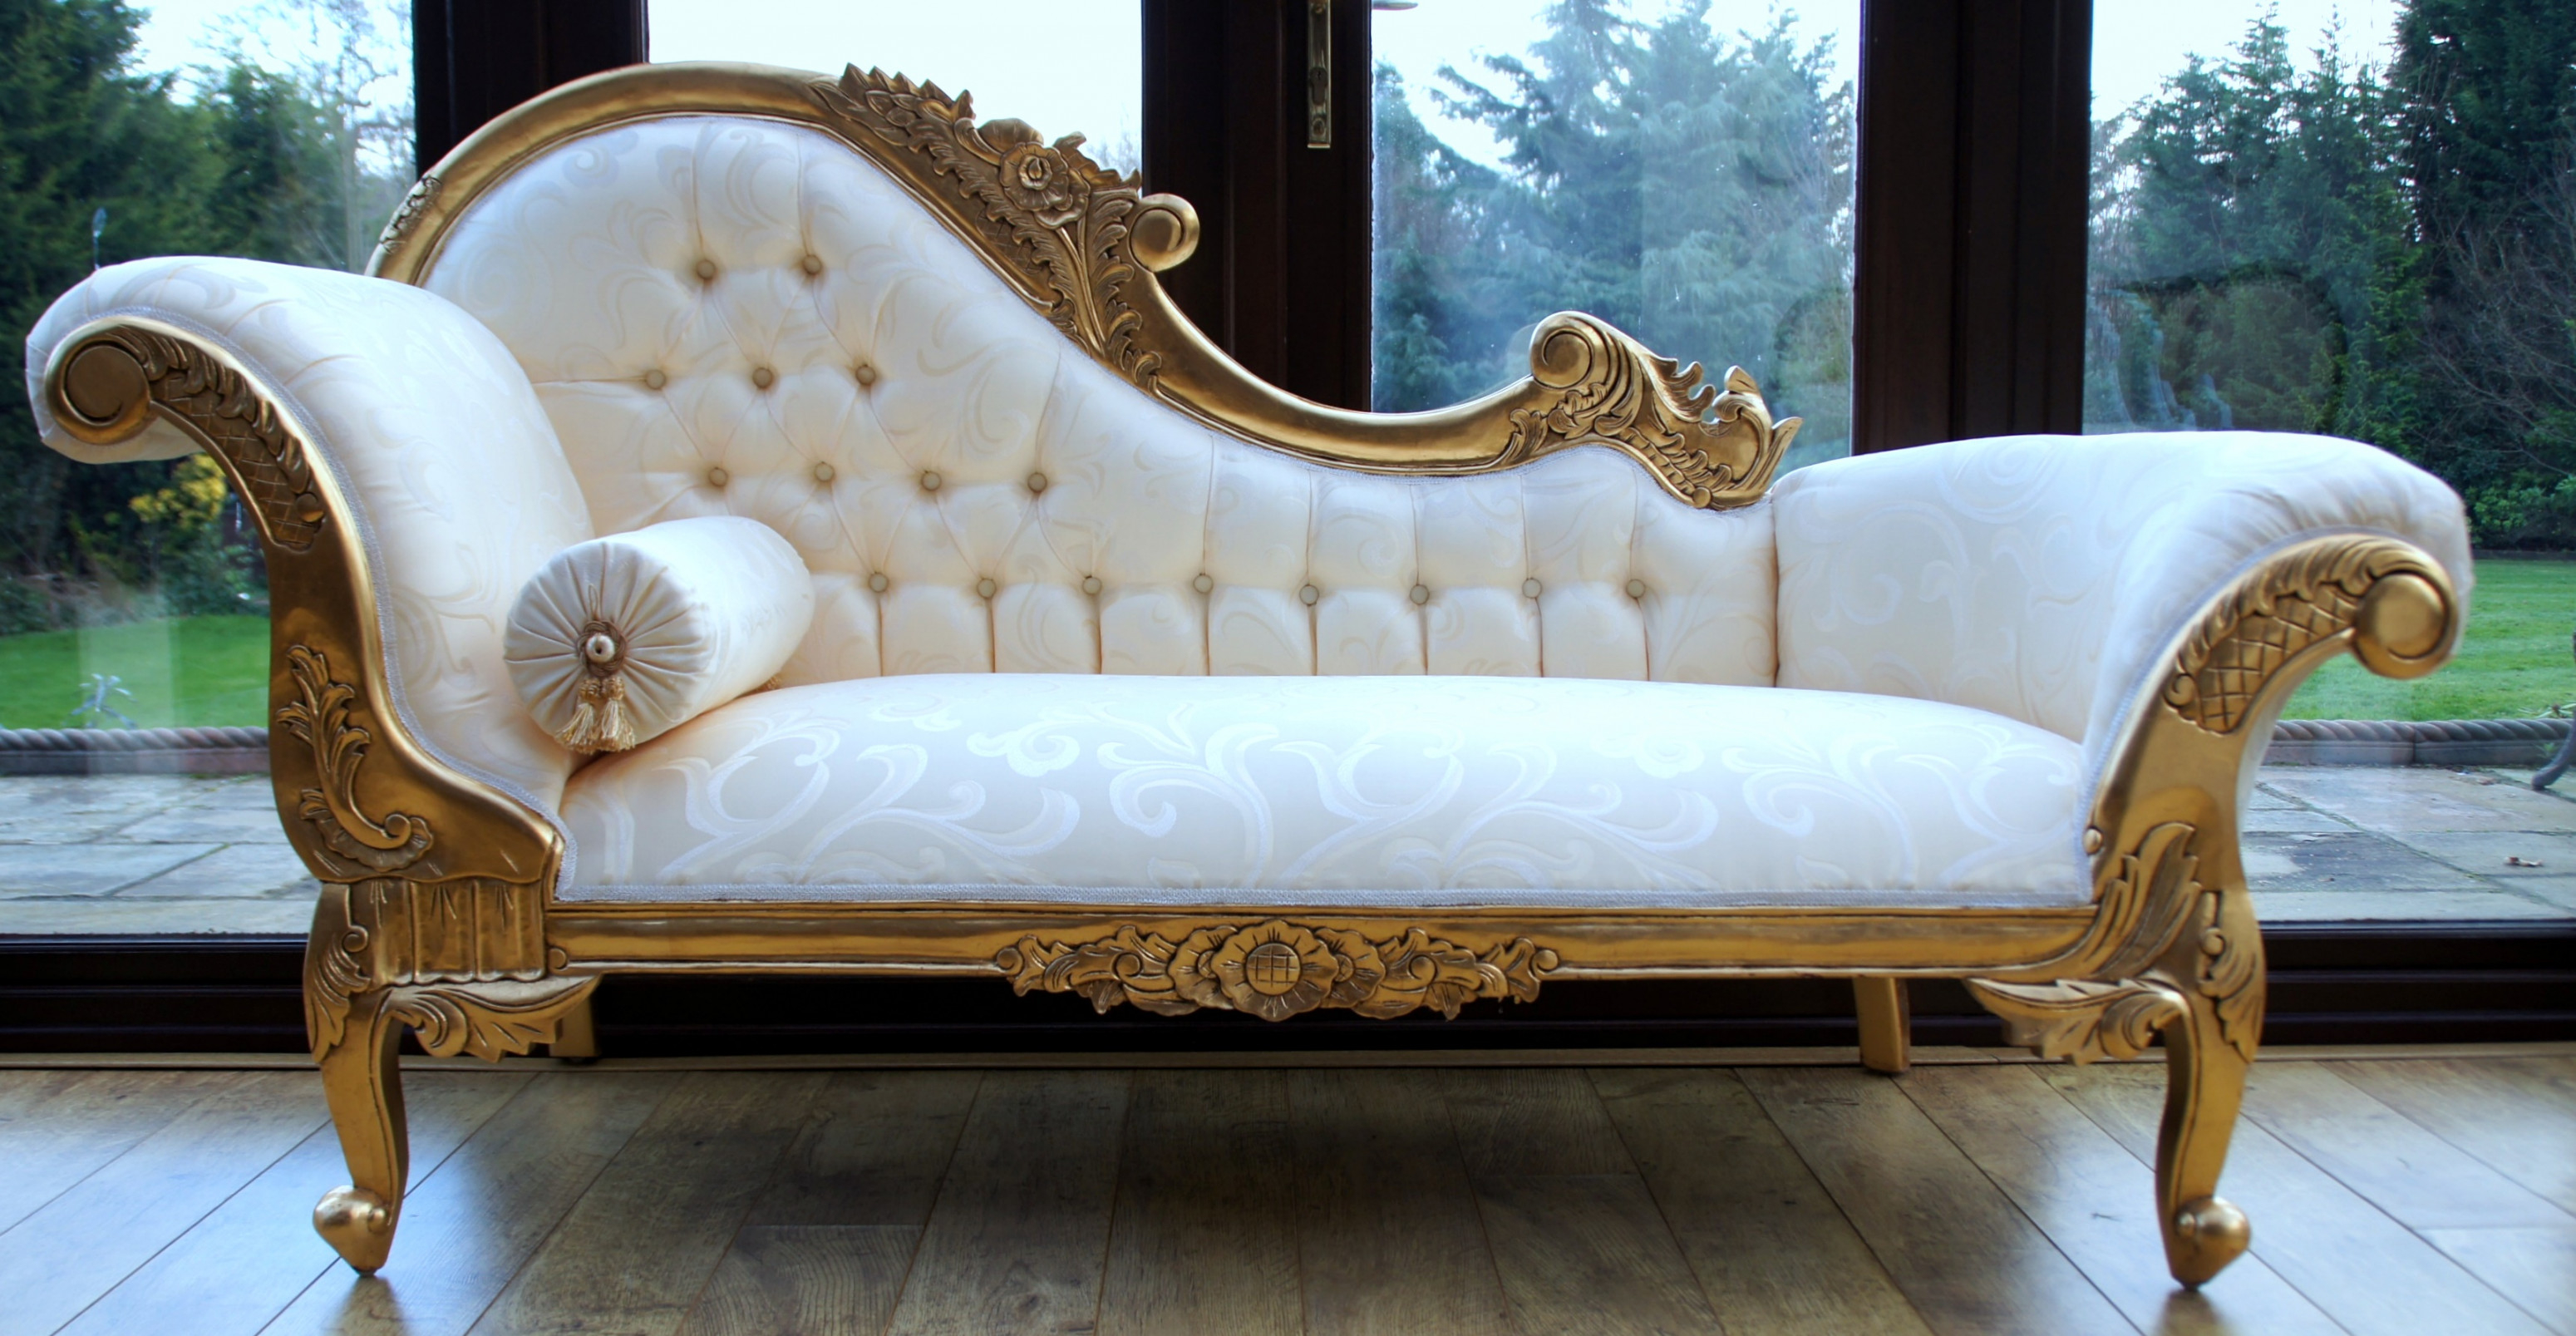 Bedroom wallpaper hi res cool fainting couch chaise lounge pile EDNSTXK